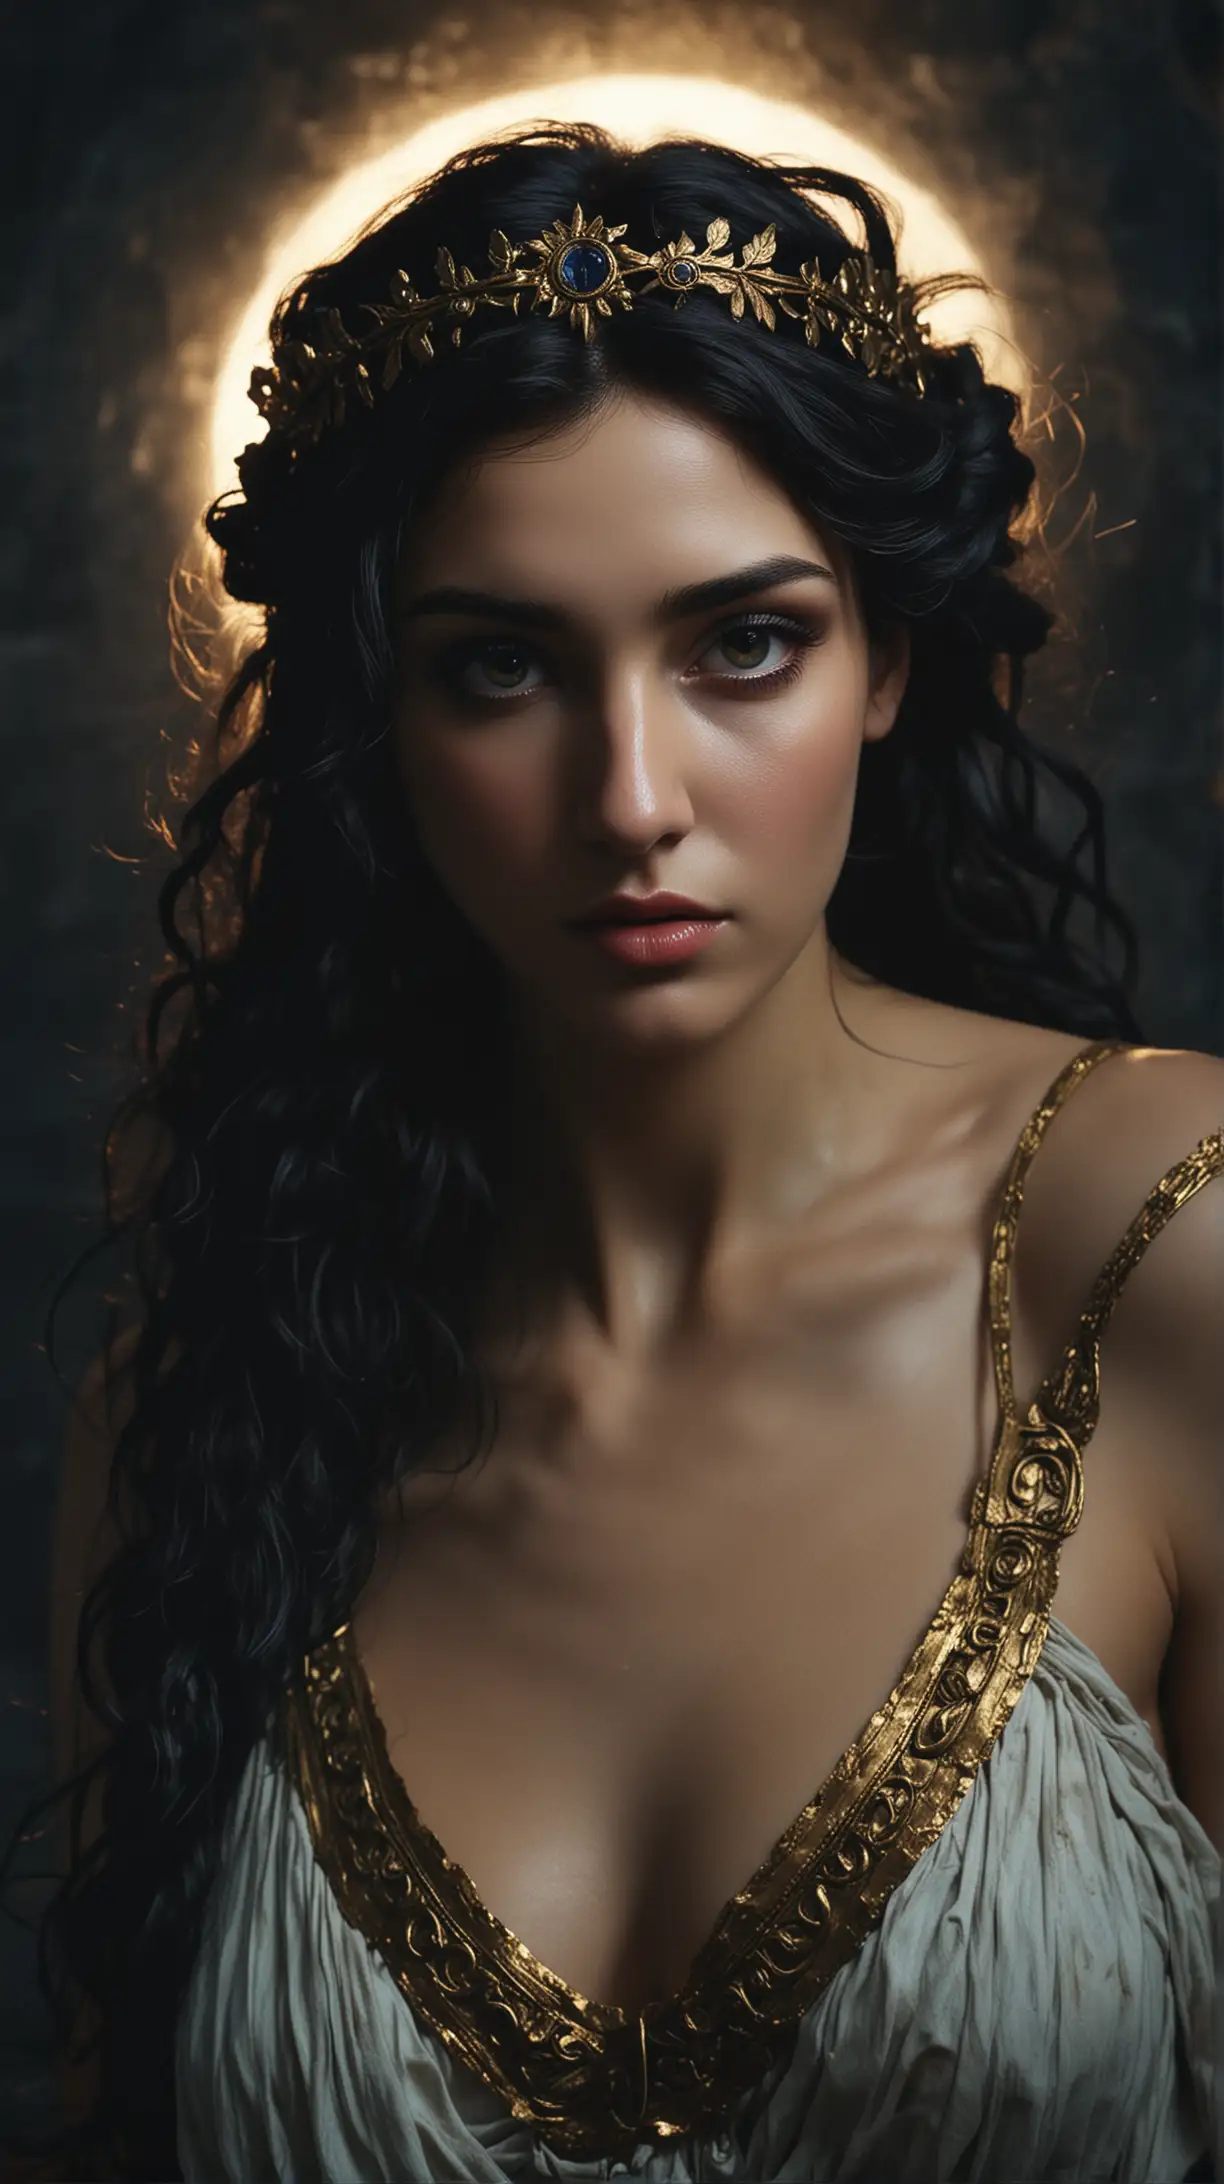 Focus: Nyx, the Greek goddess of the night.

Style:

Choose one or combine for desired effect:
Dramatic lighting with strong contrasts between light and shadow.
Ethereal and dreamlike, with a sense of mystery.
Classical painting style with rich colors and textures.